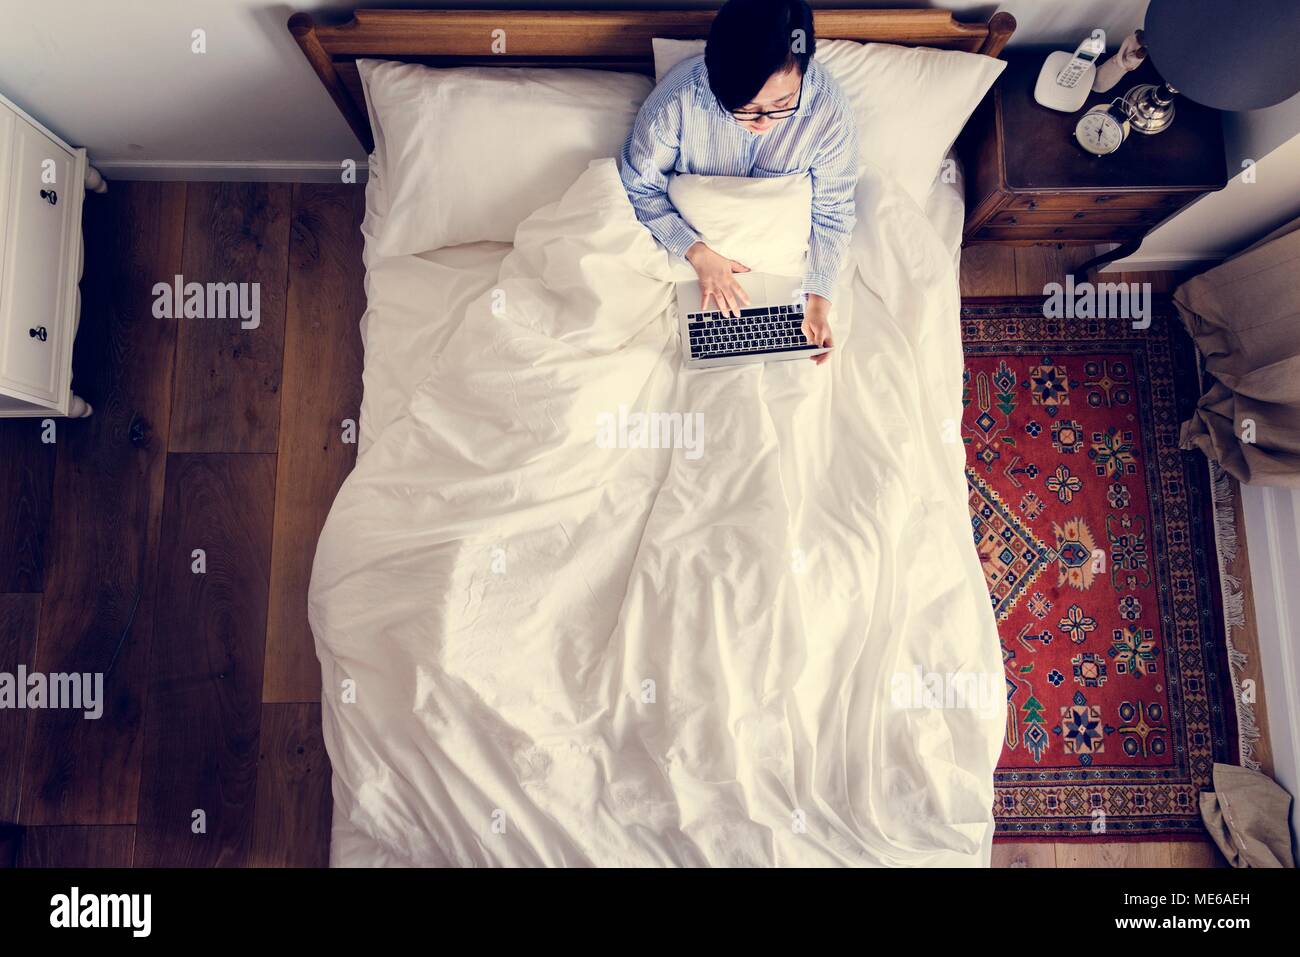 Woman in bed using a digital device Stock Photo